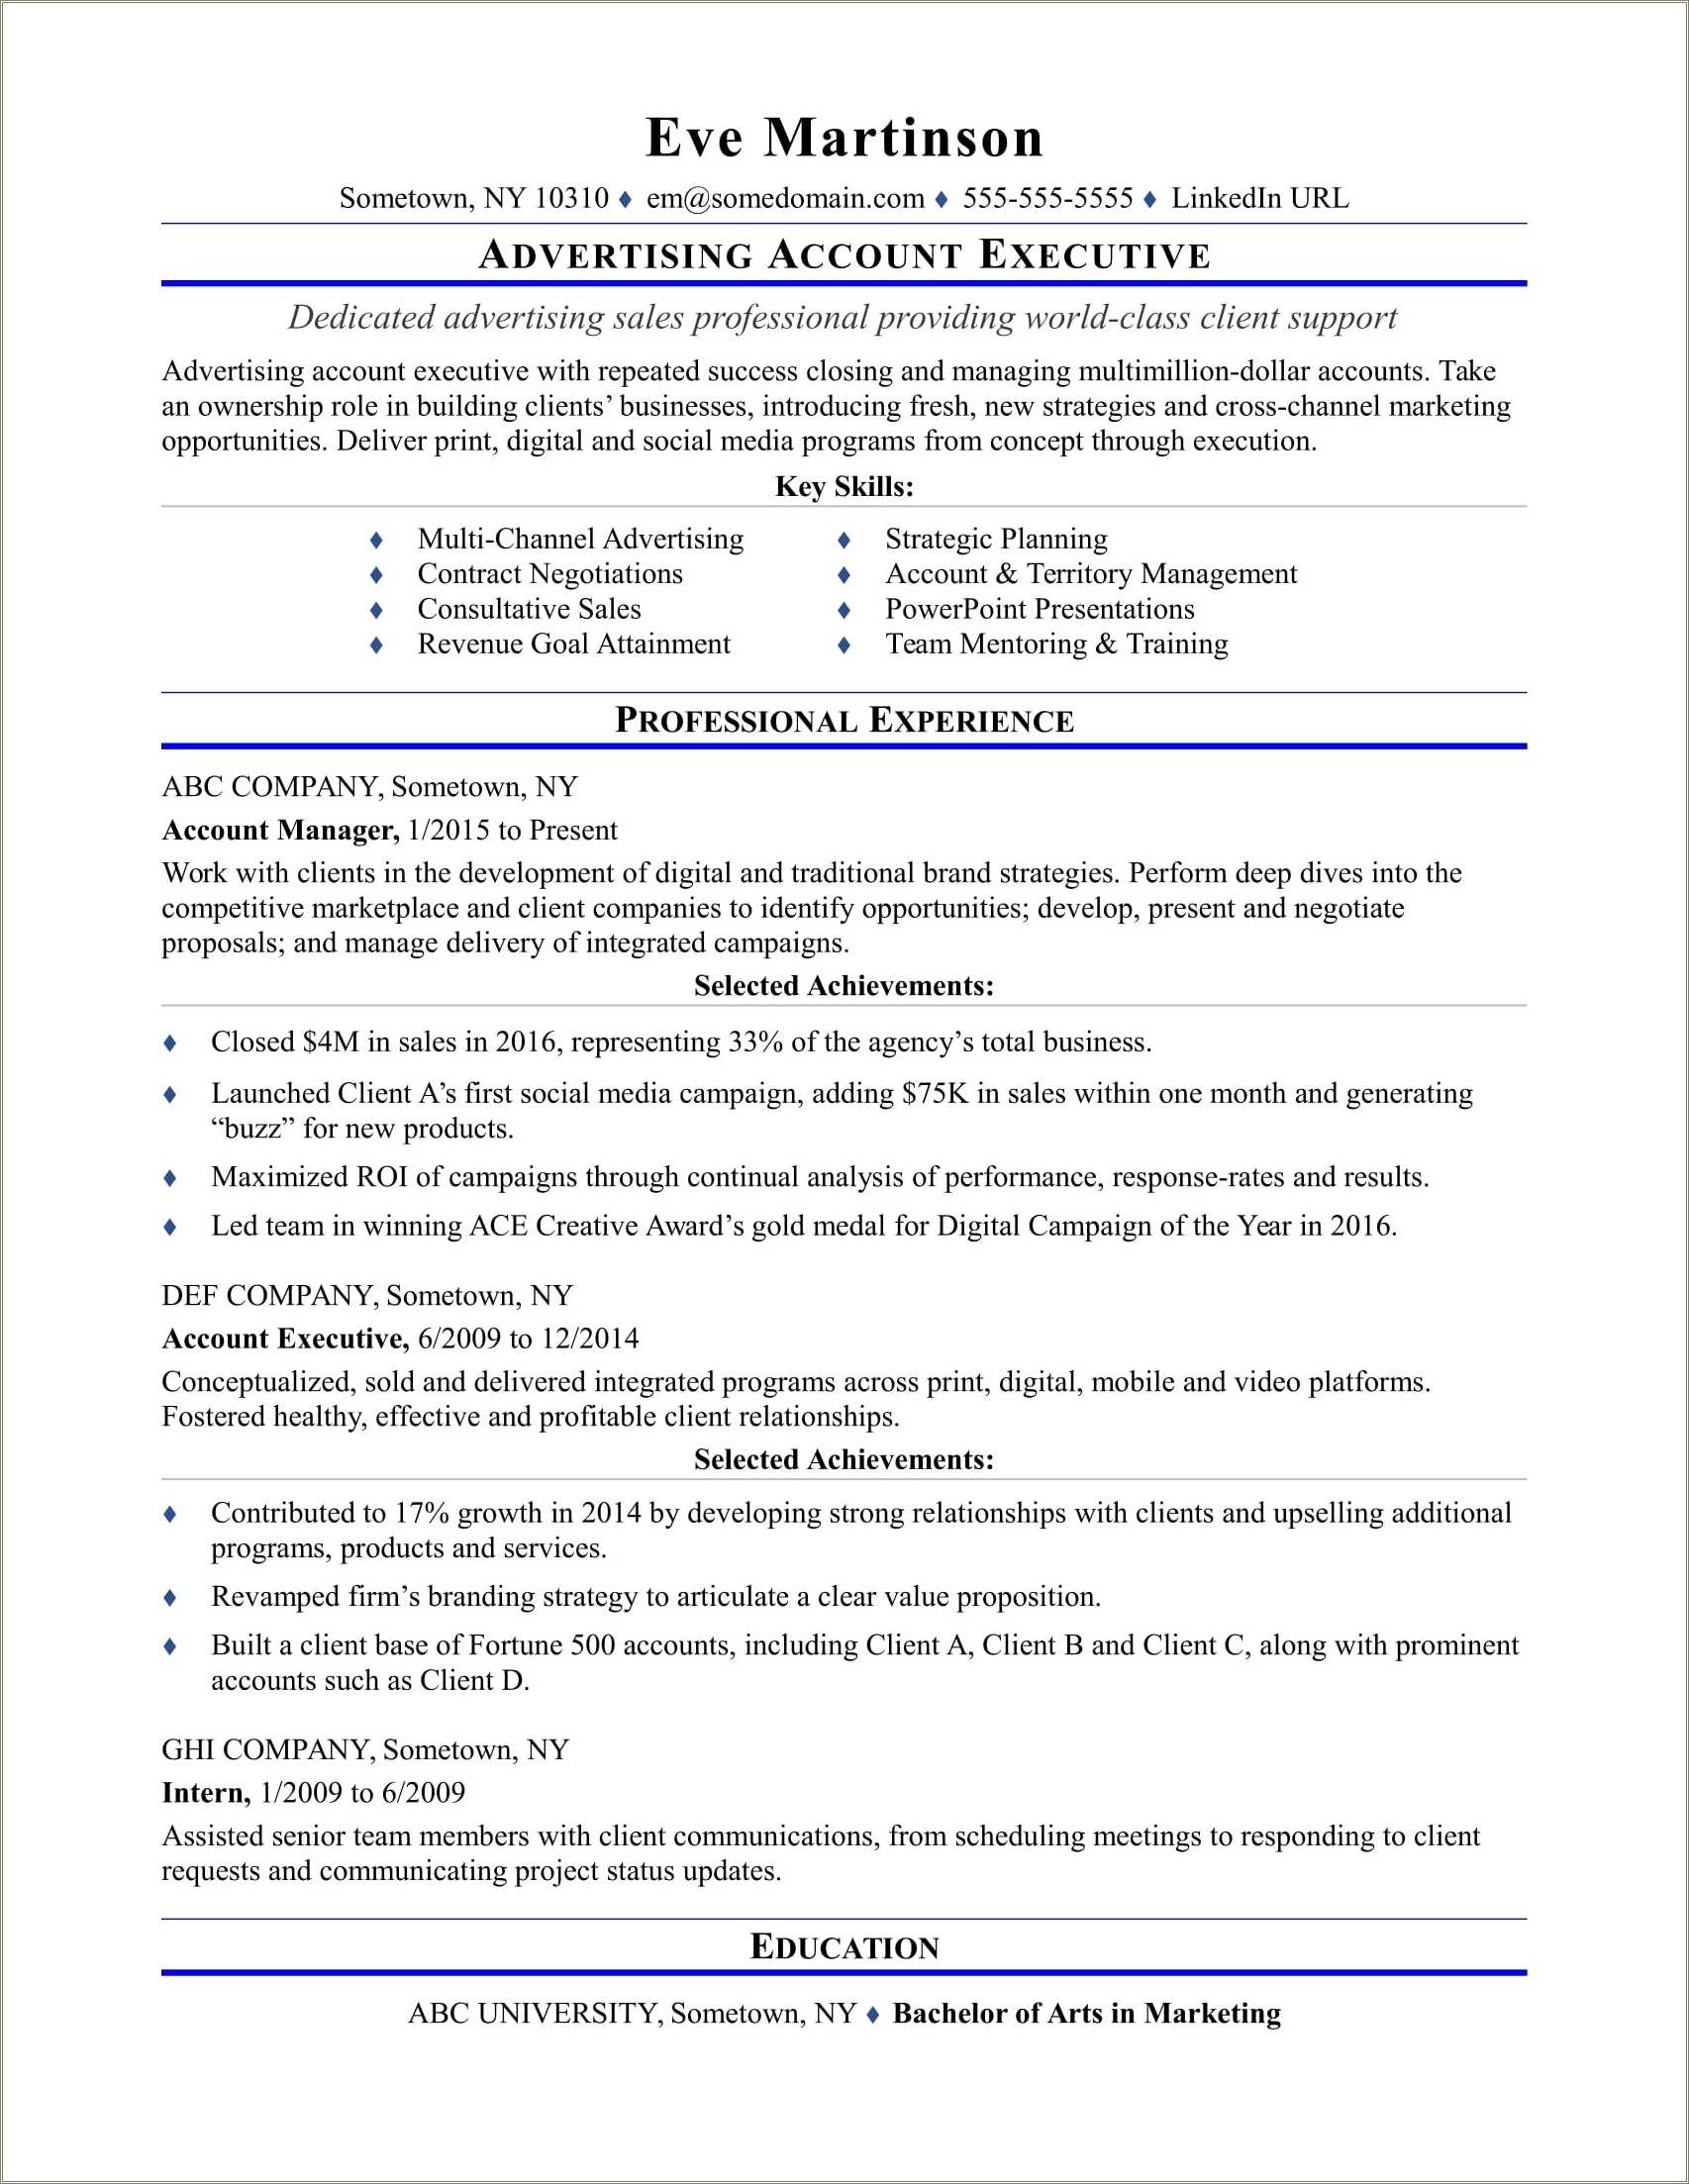 Sample Resume With Different Positions At Same Company